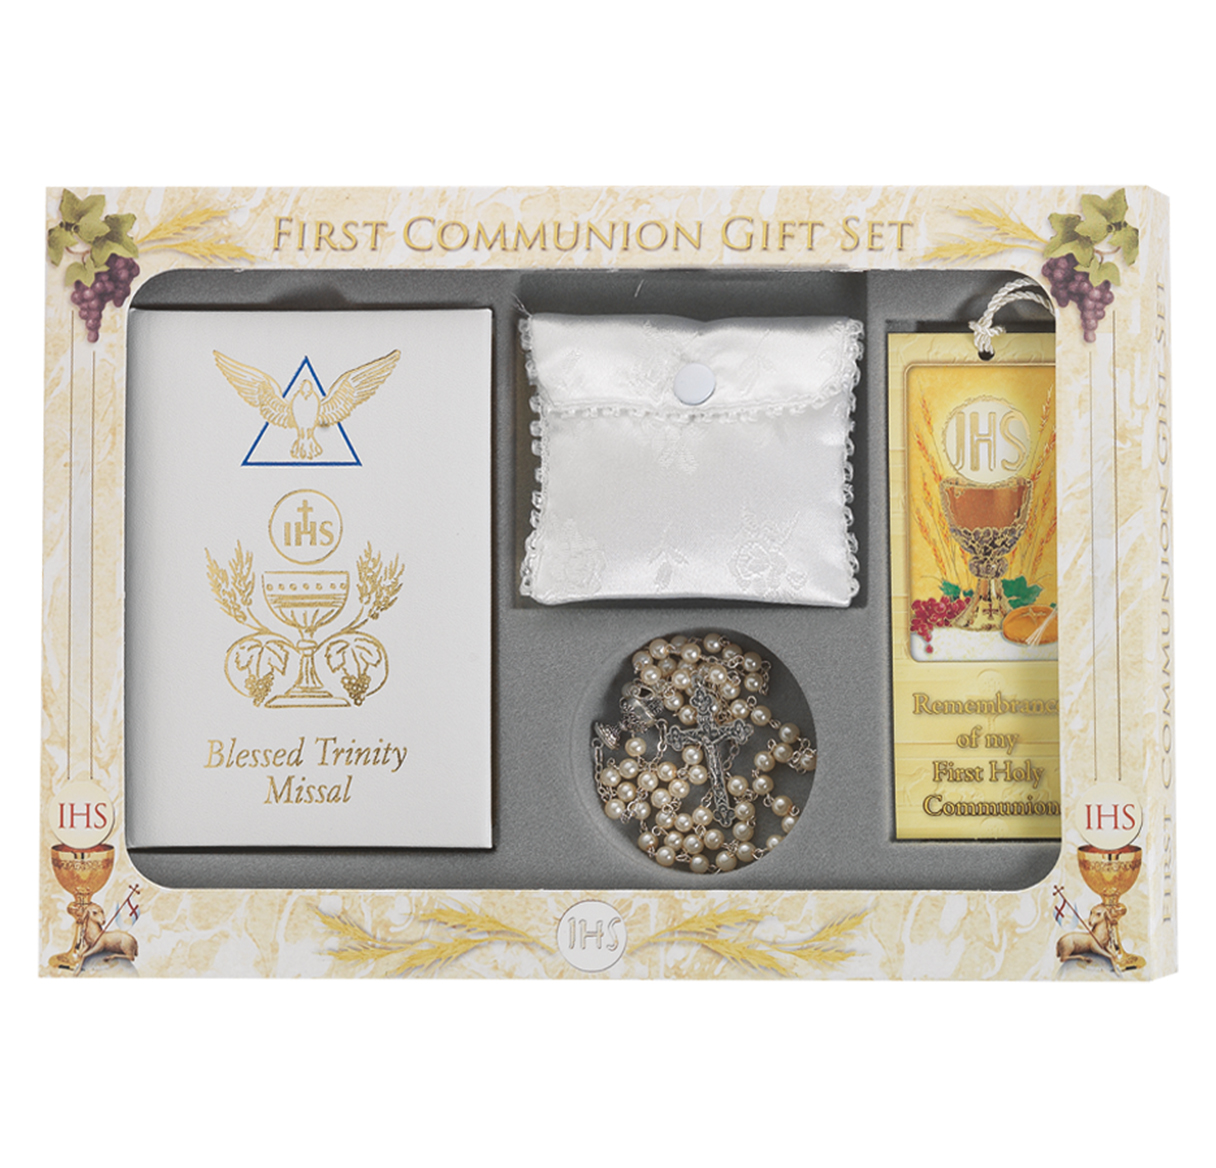 First Communion Gift Set 6 pc Girls White Blessed Trinity Missal